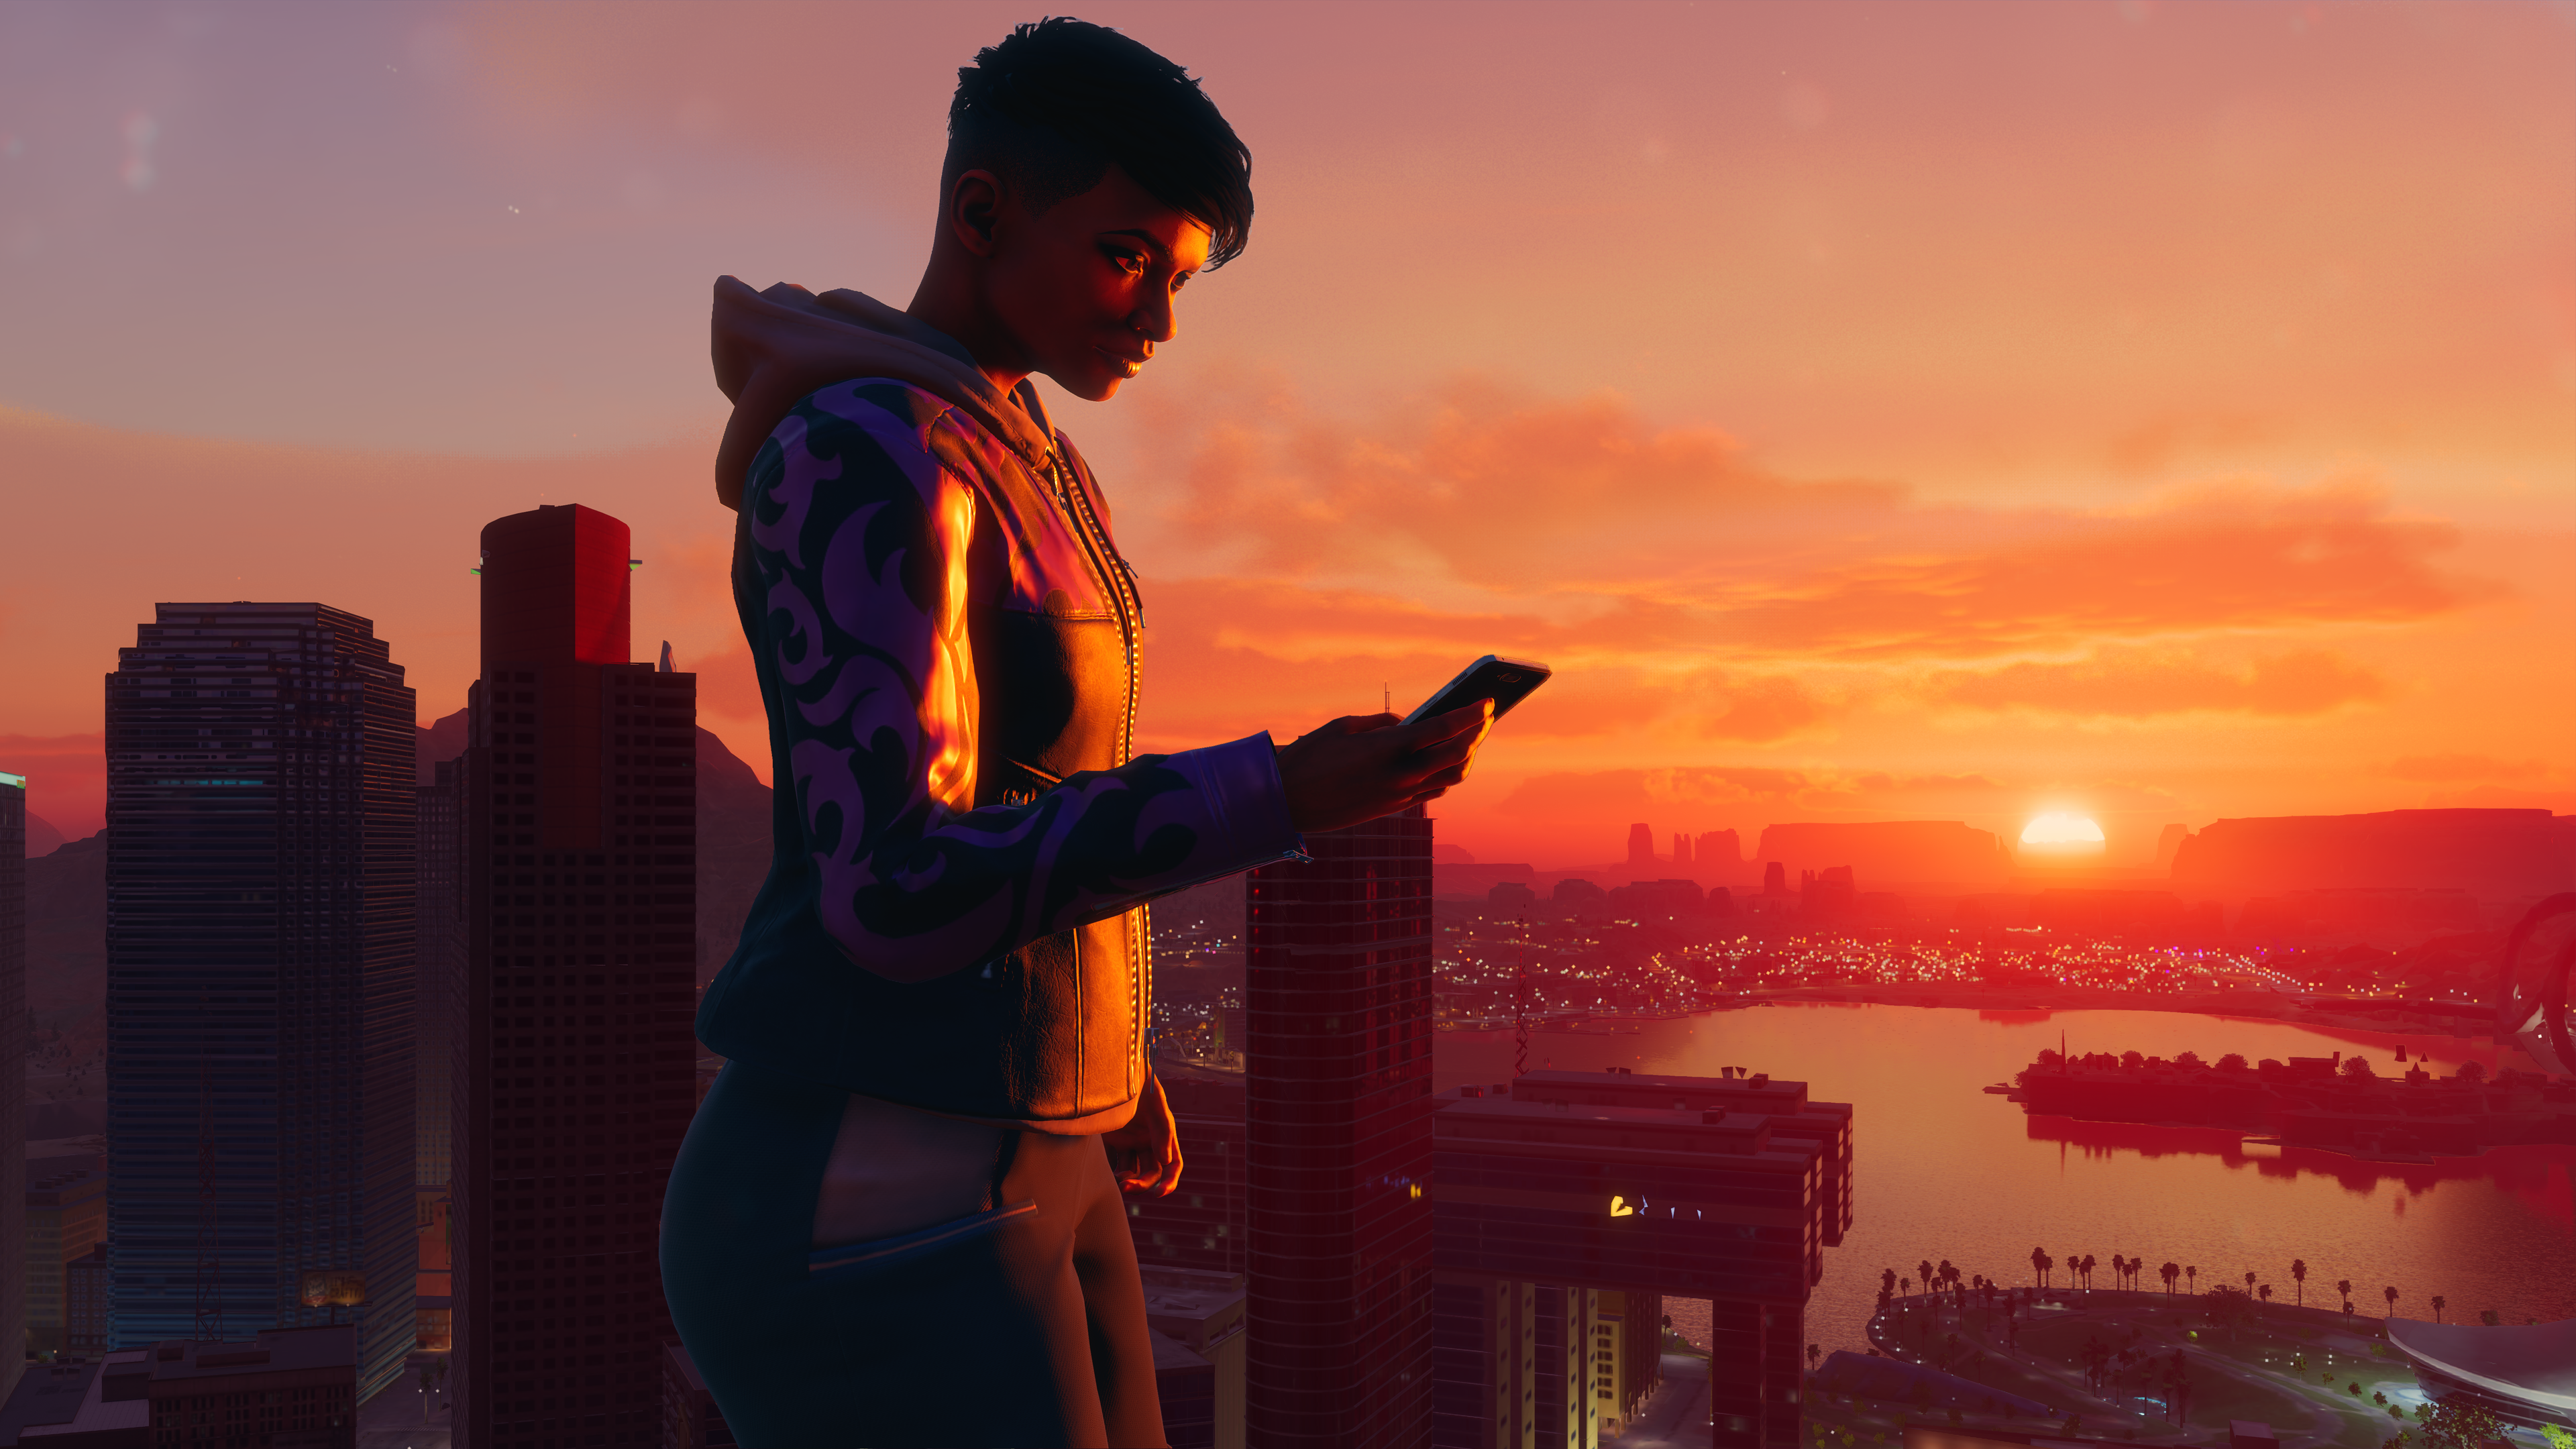 Image for Saints Row developers discuss the game's reveal backlash, and bringing fans back to the series